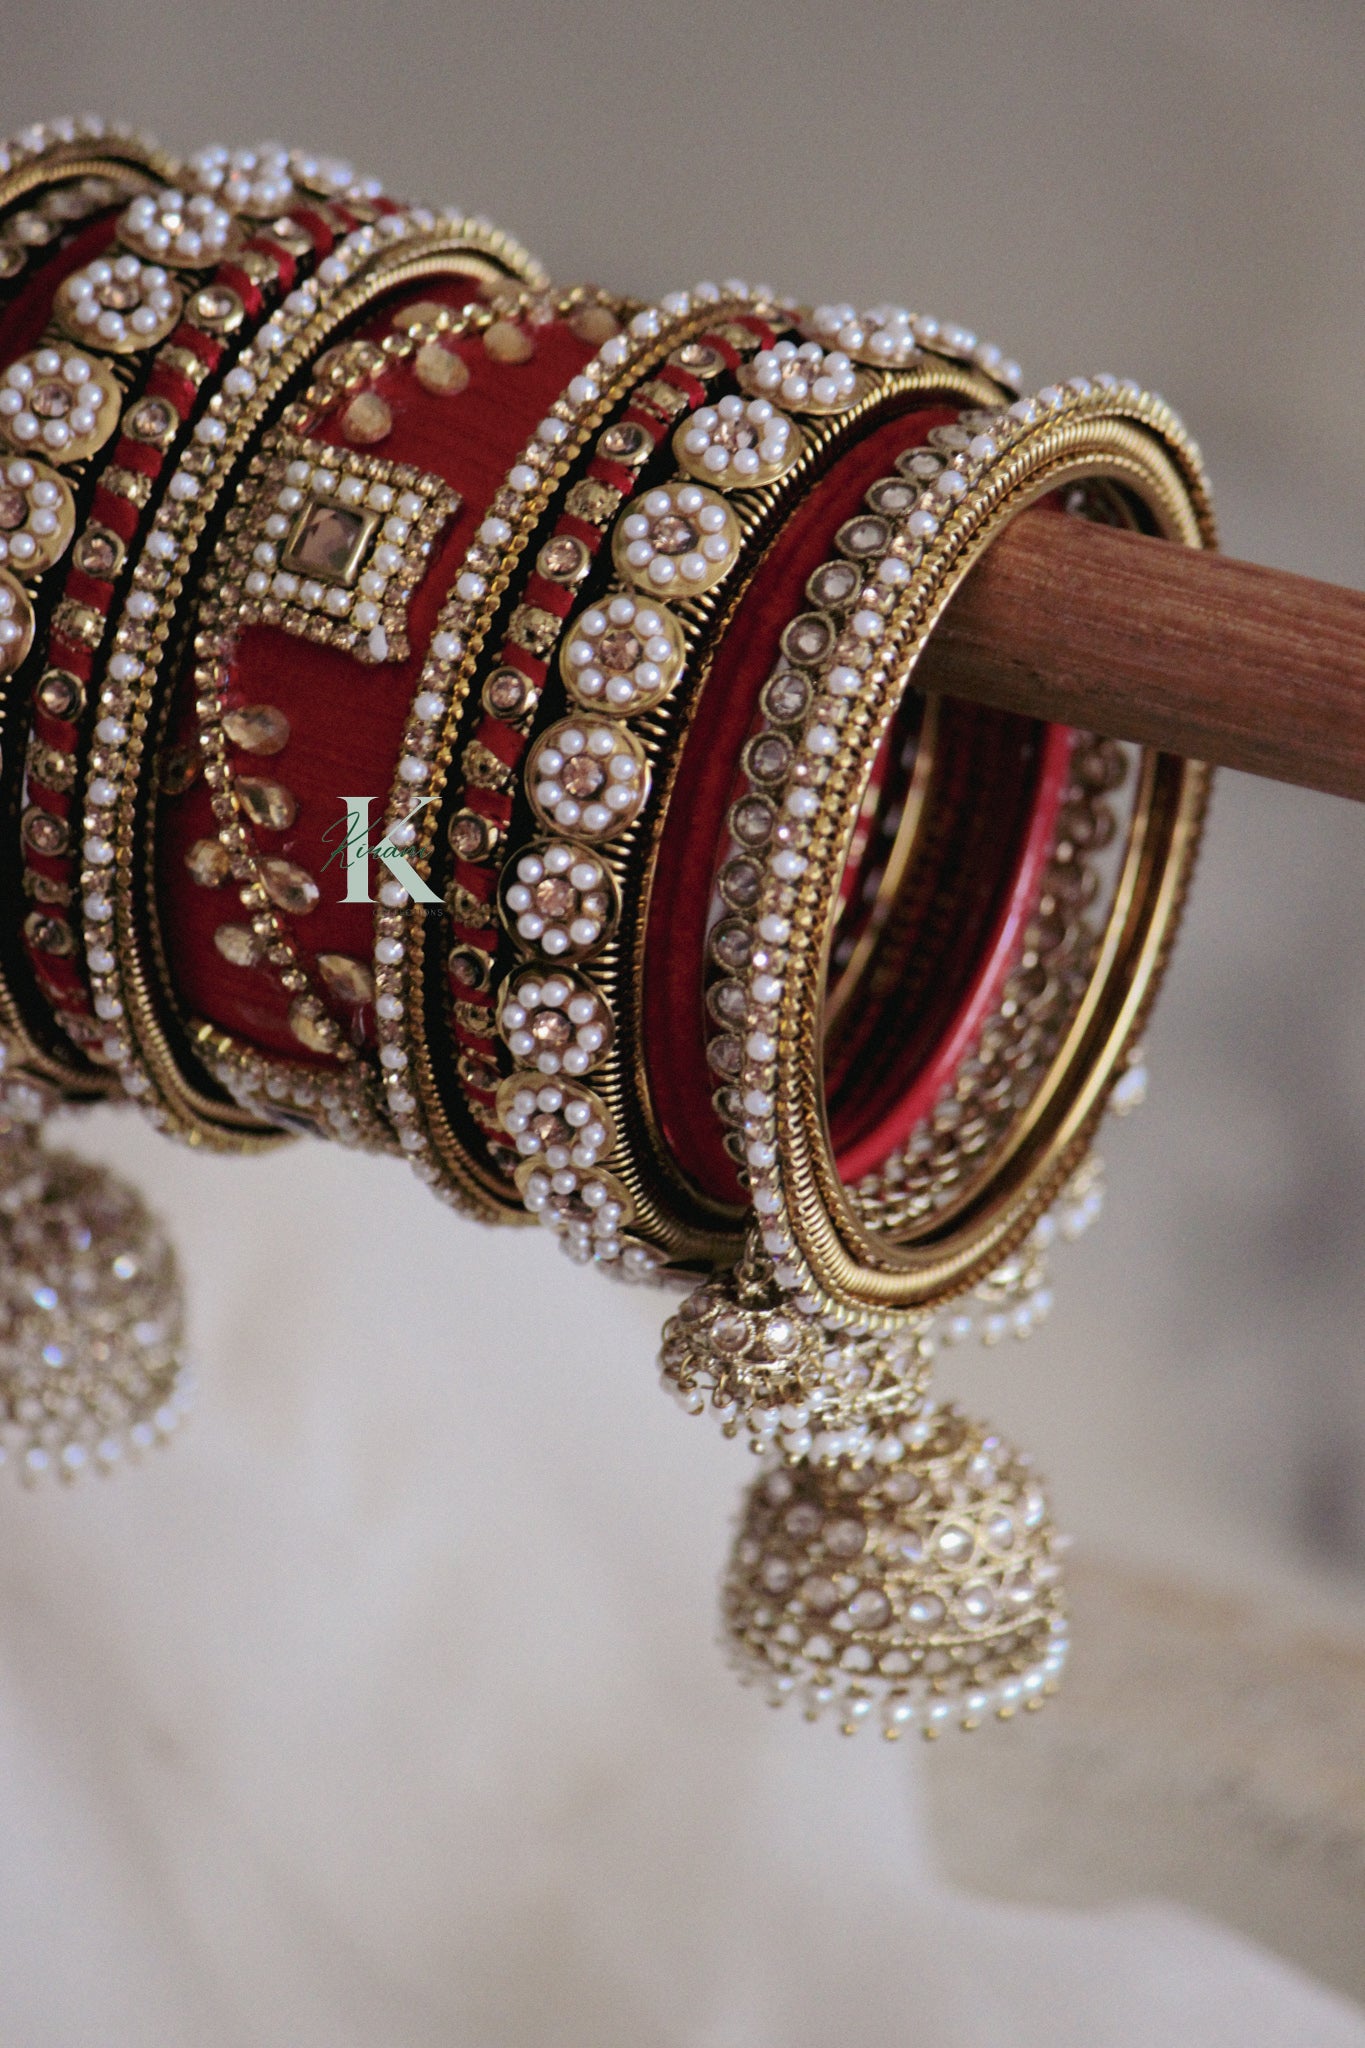 SONA (Bangles for One Hand)